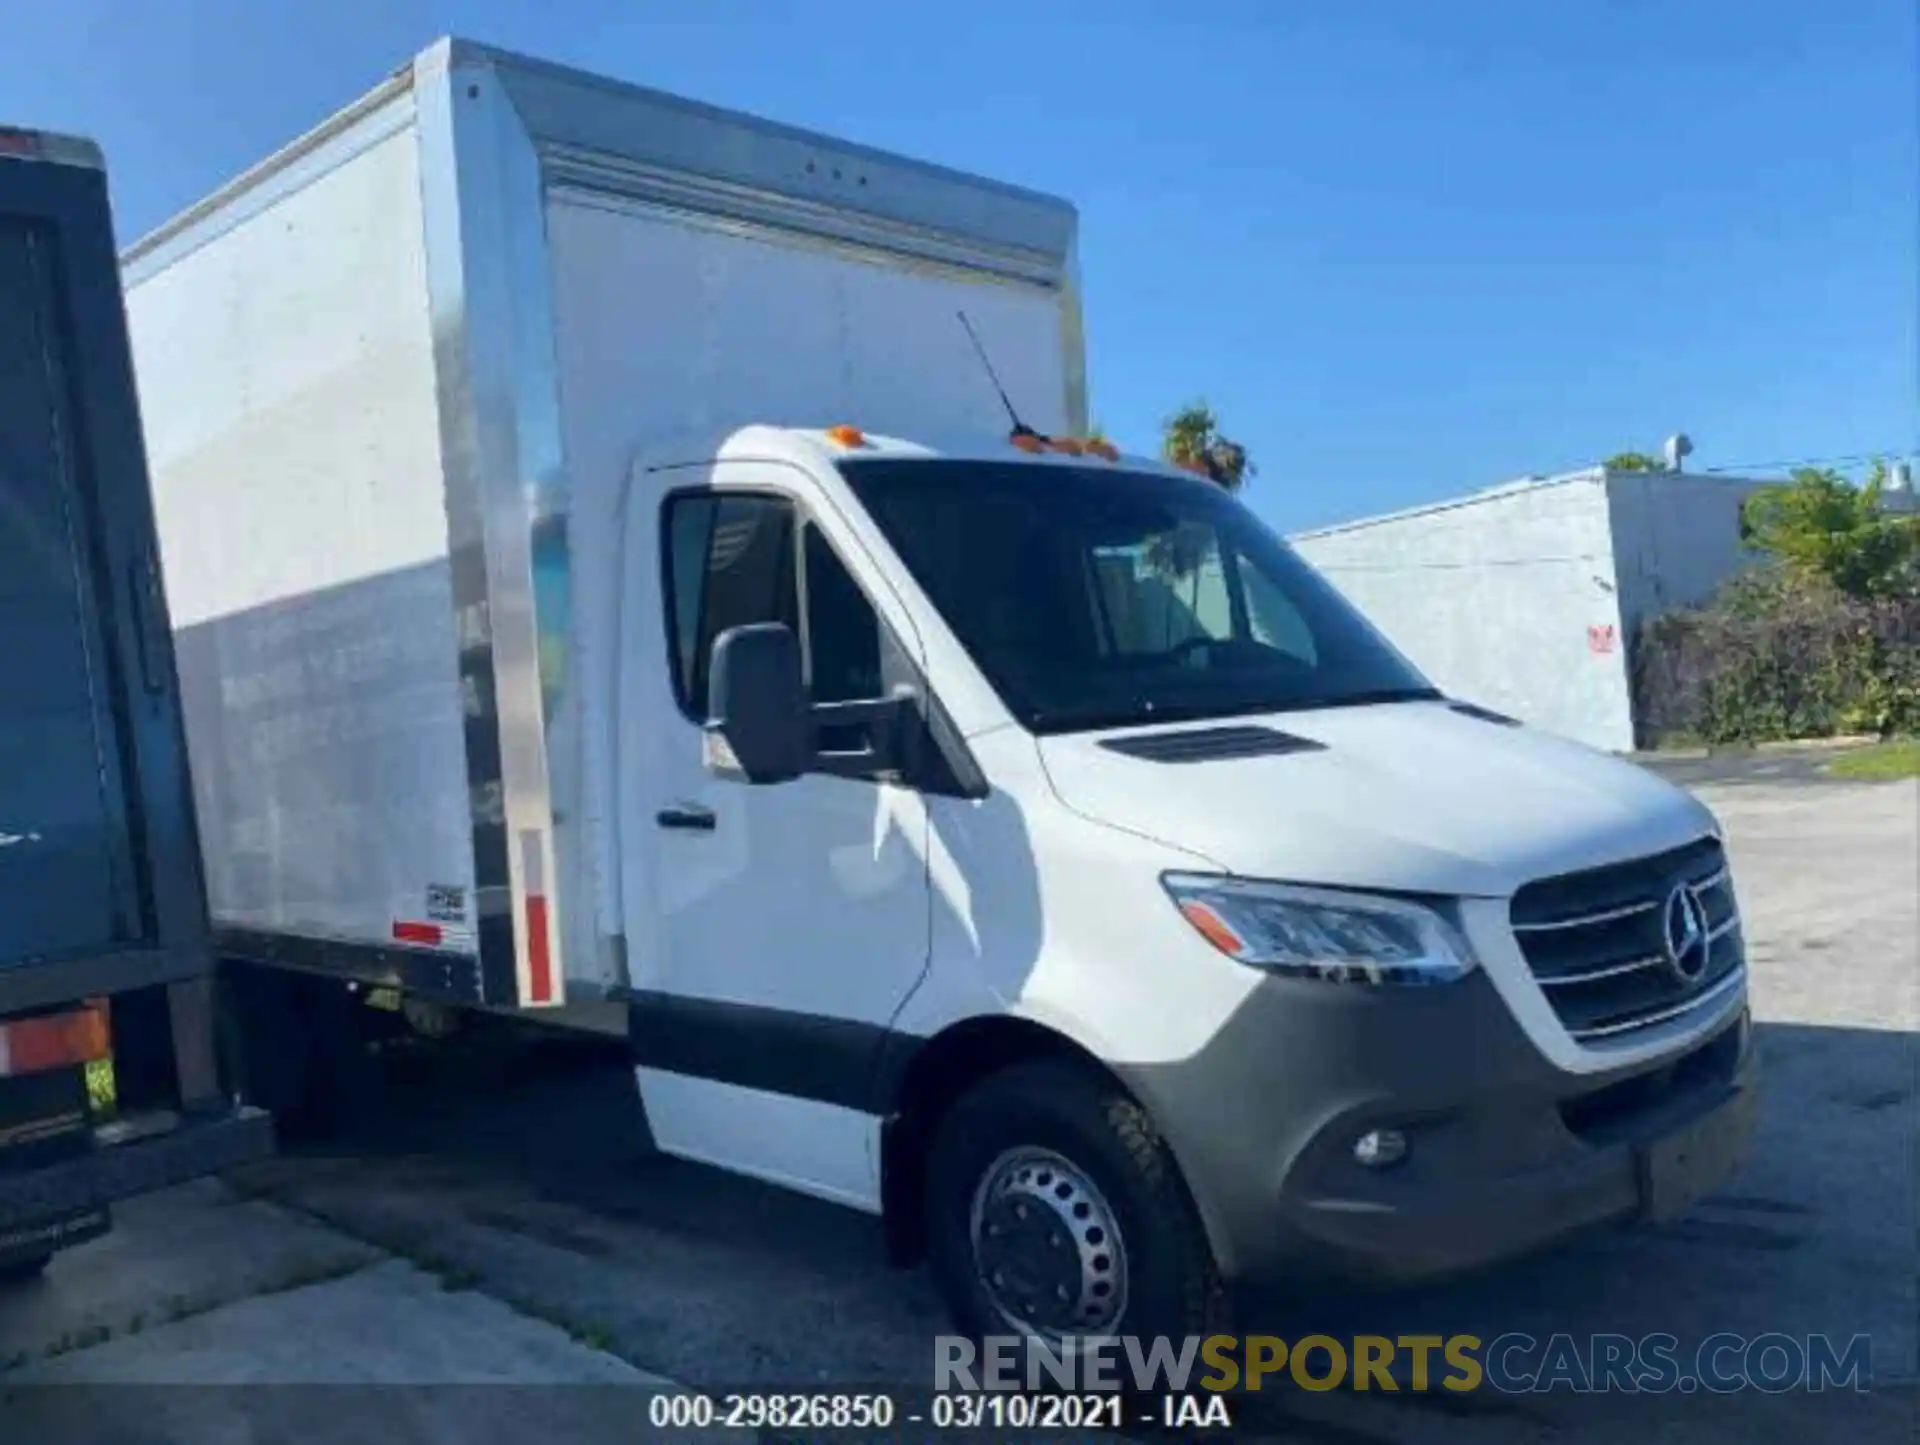 1 Photograph of a damaged car WDAPF4CD3KN013563 MERCEDES-BENZ SPRINTER CAB CHASSIS 2019